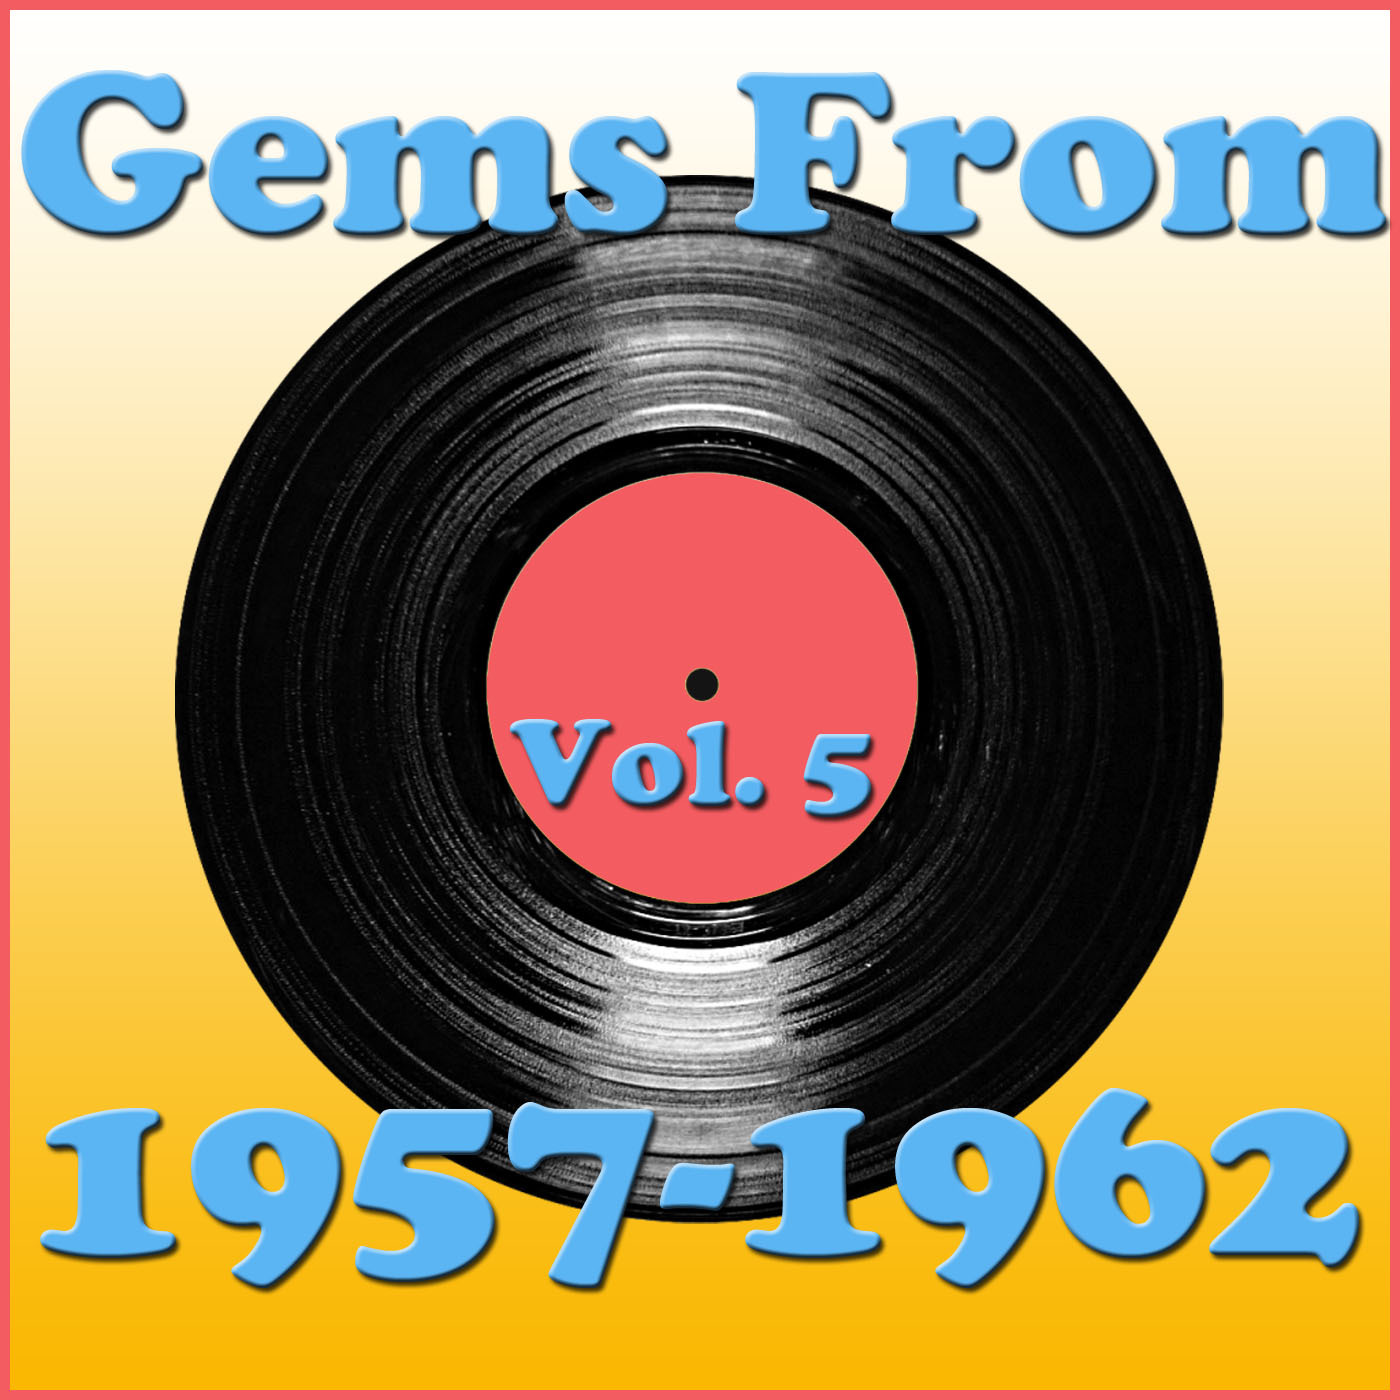 Gems From 1957-1962, Vol. 5